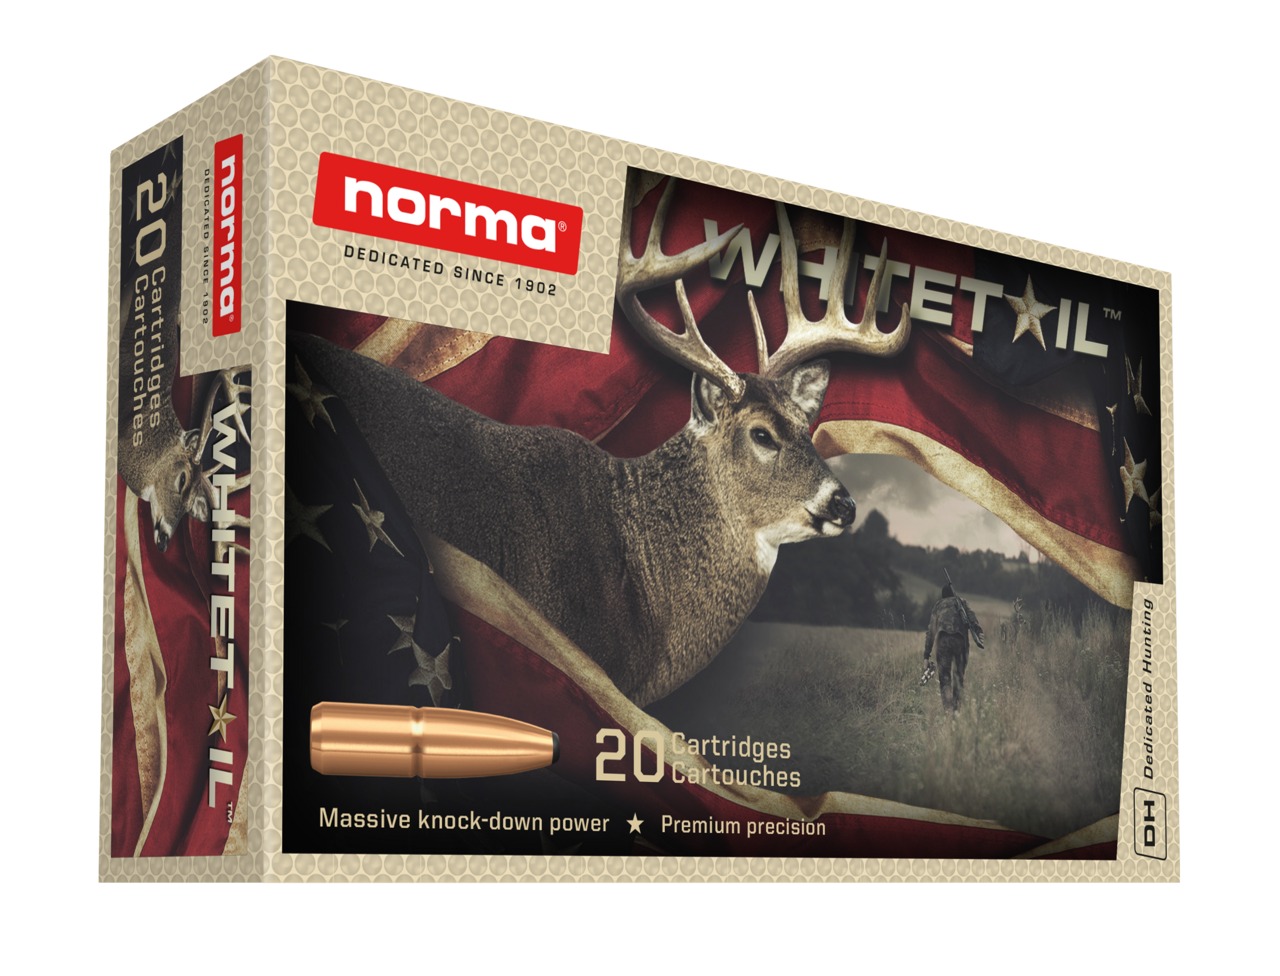 CART NORMA 243WIN 100GR WHITETAIL BTE 20 ref 20160462 NORMA